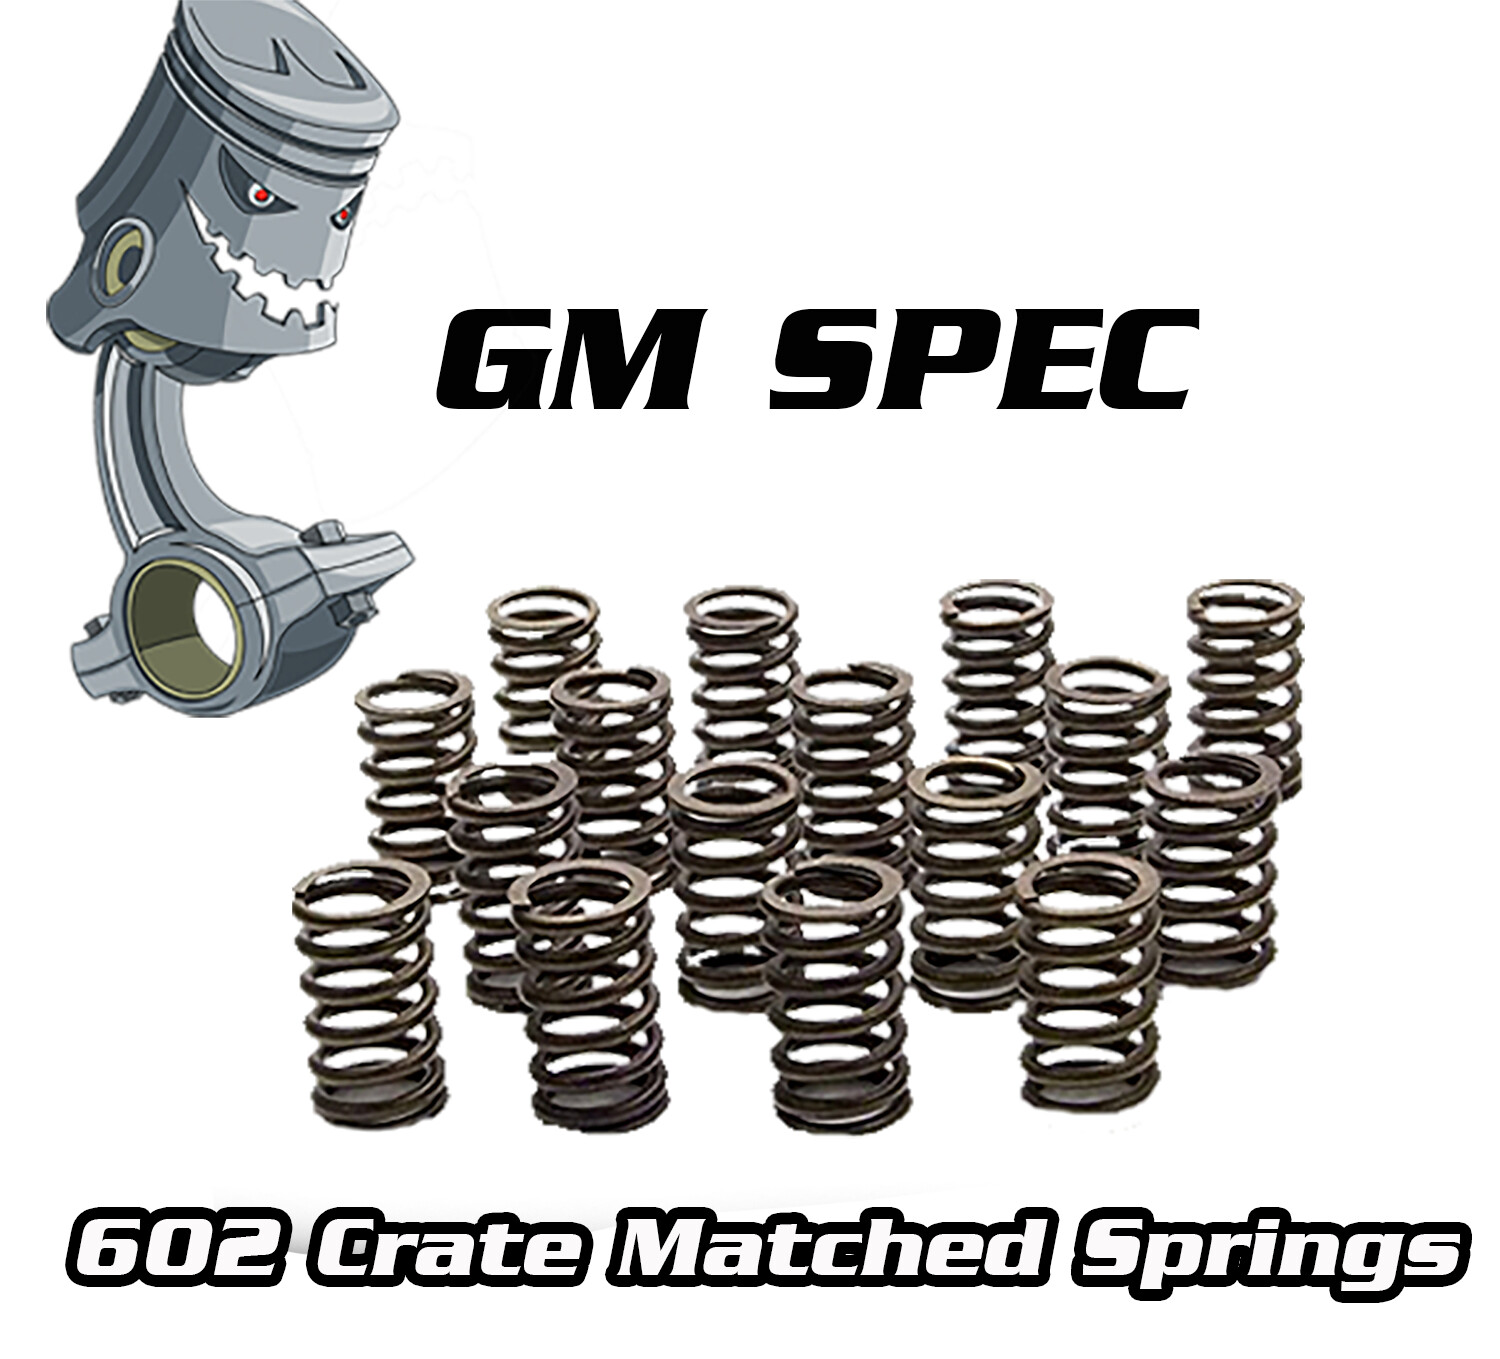 SALE: GM Spec 79lb Matched Valve Springs for 602 Crate